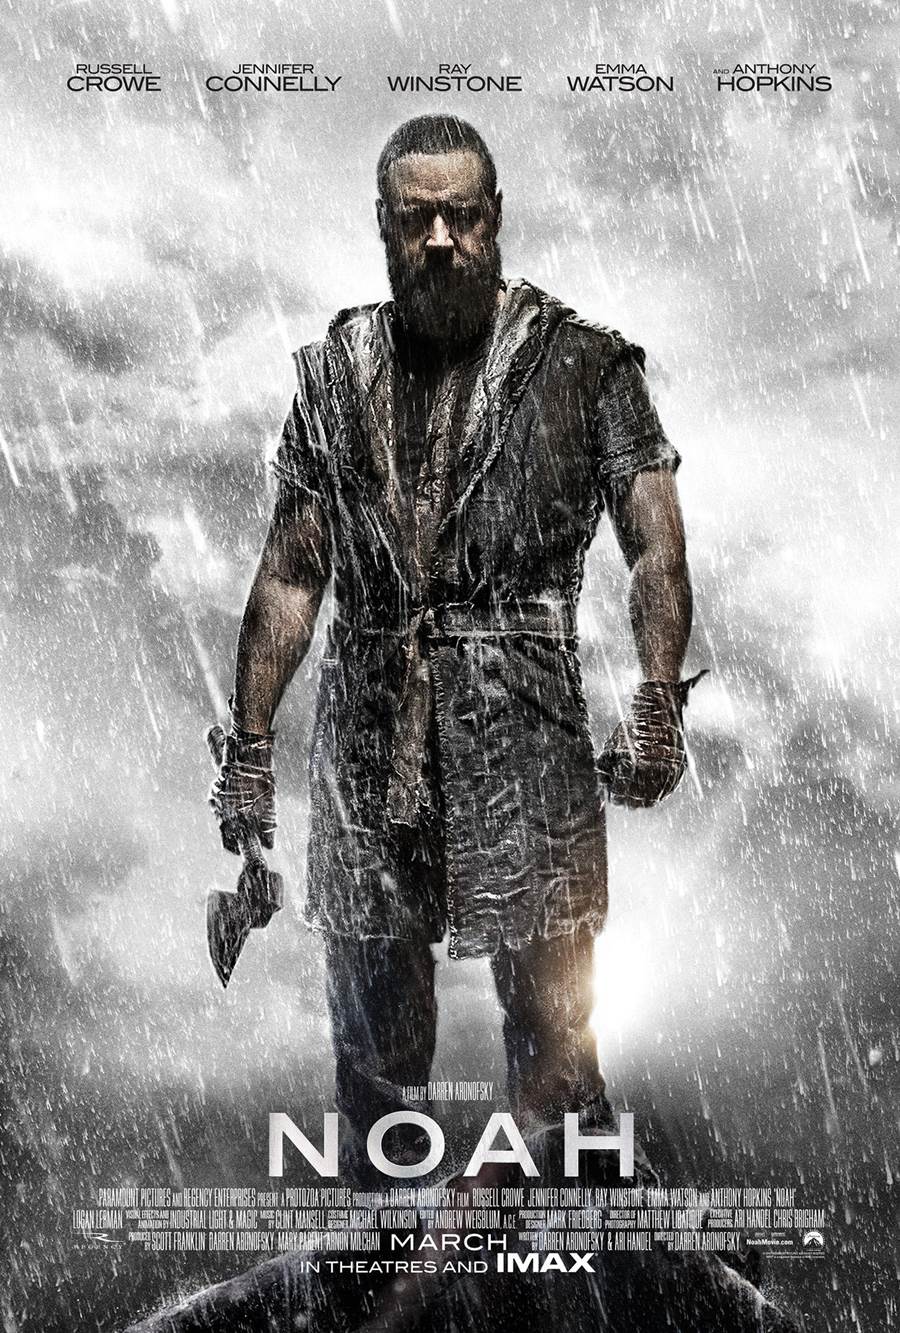 Noah Movie Posters and Wallpapers 2014 - XciteFun.net
